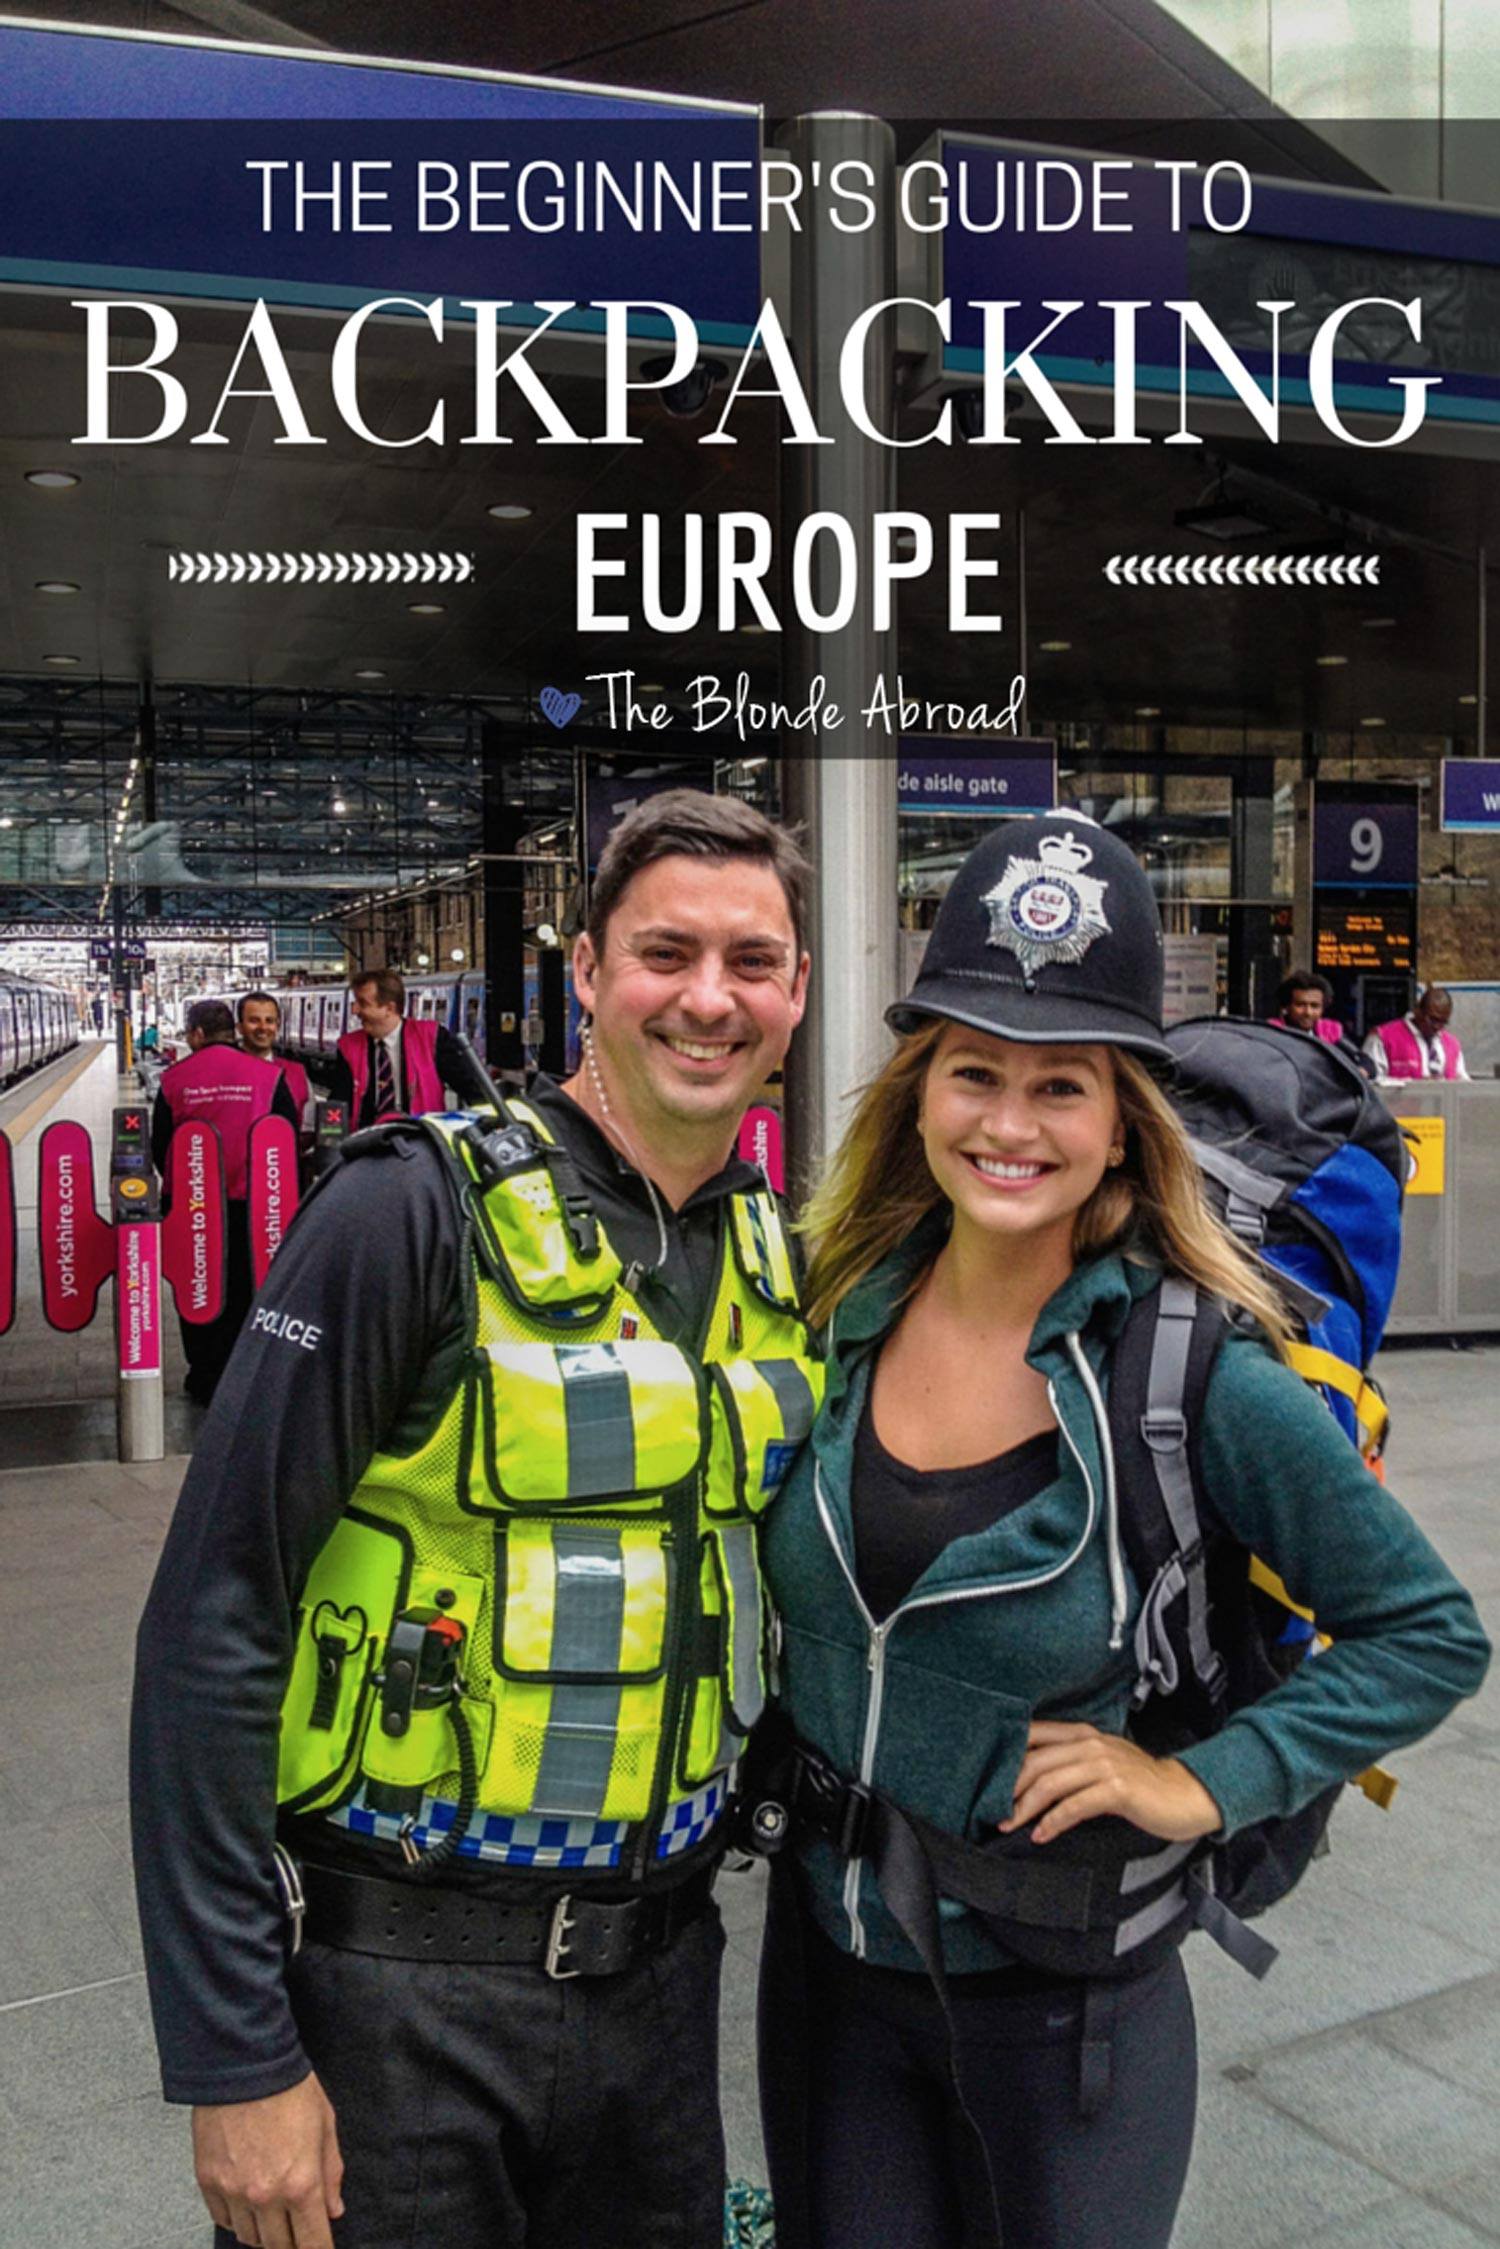 Backpacking In Europe Guide - Backpacking Europe 1